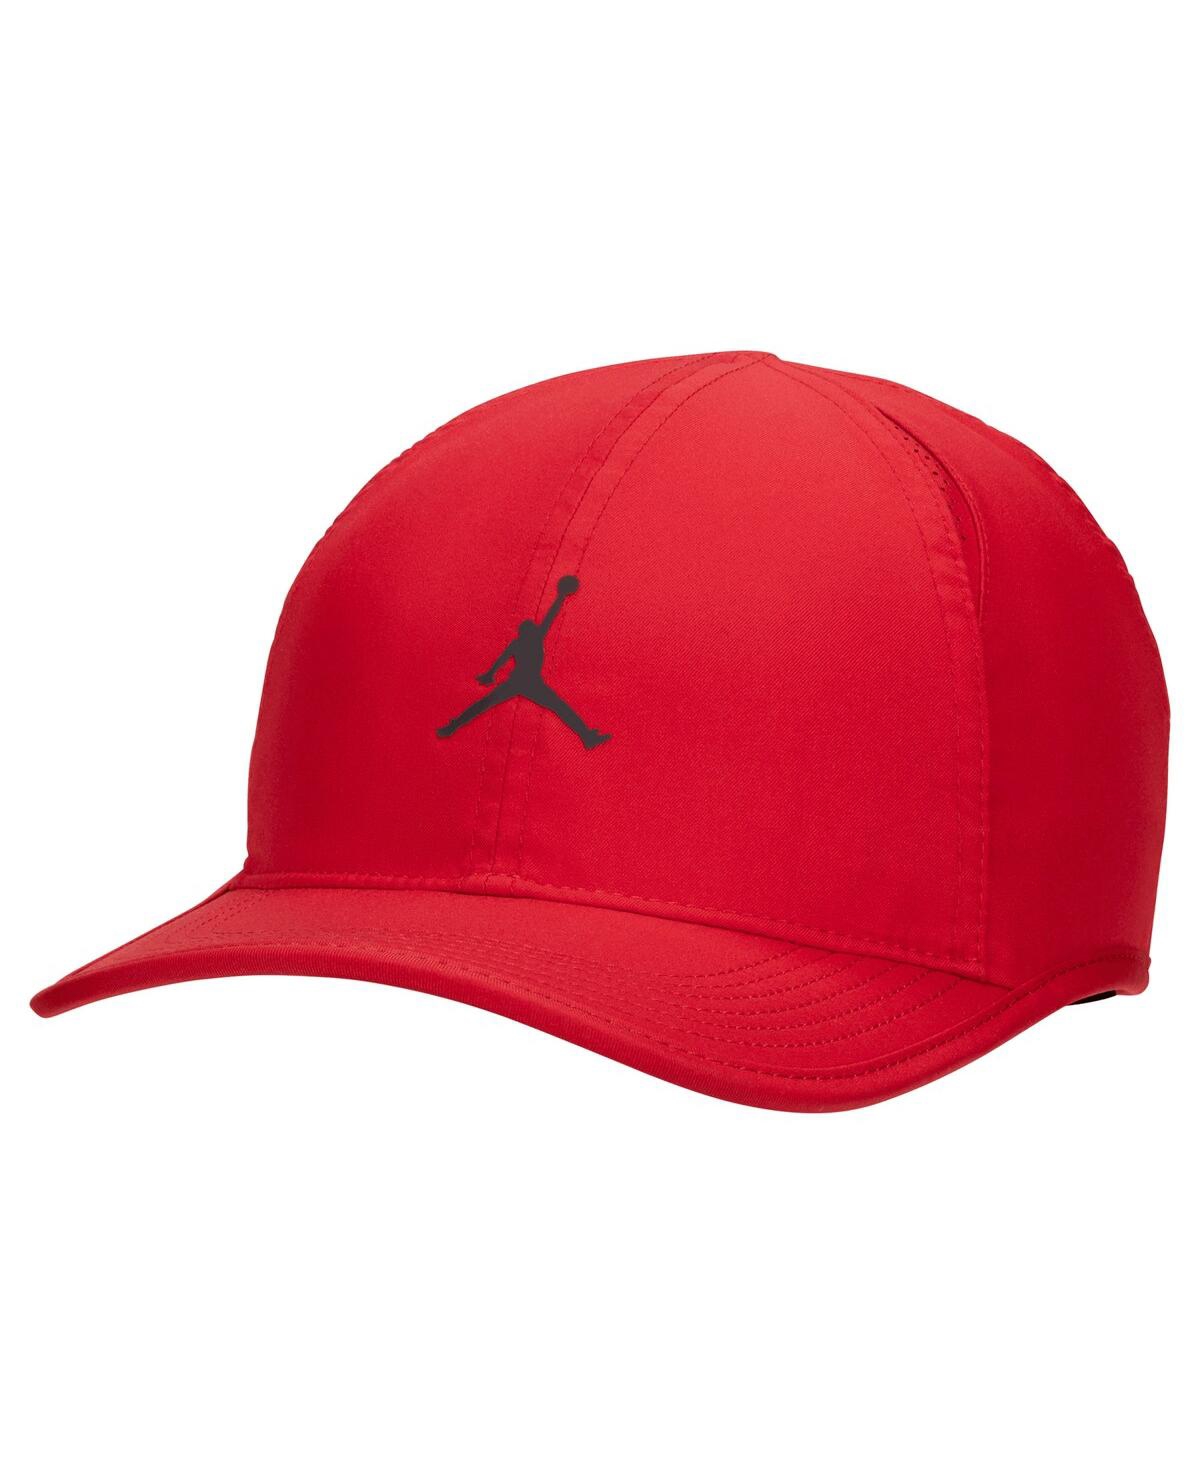 Men's Red Club Performance Adjustable Hat - Red